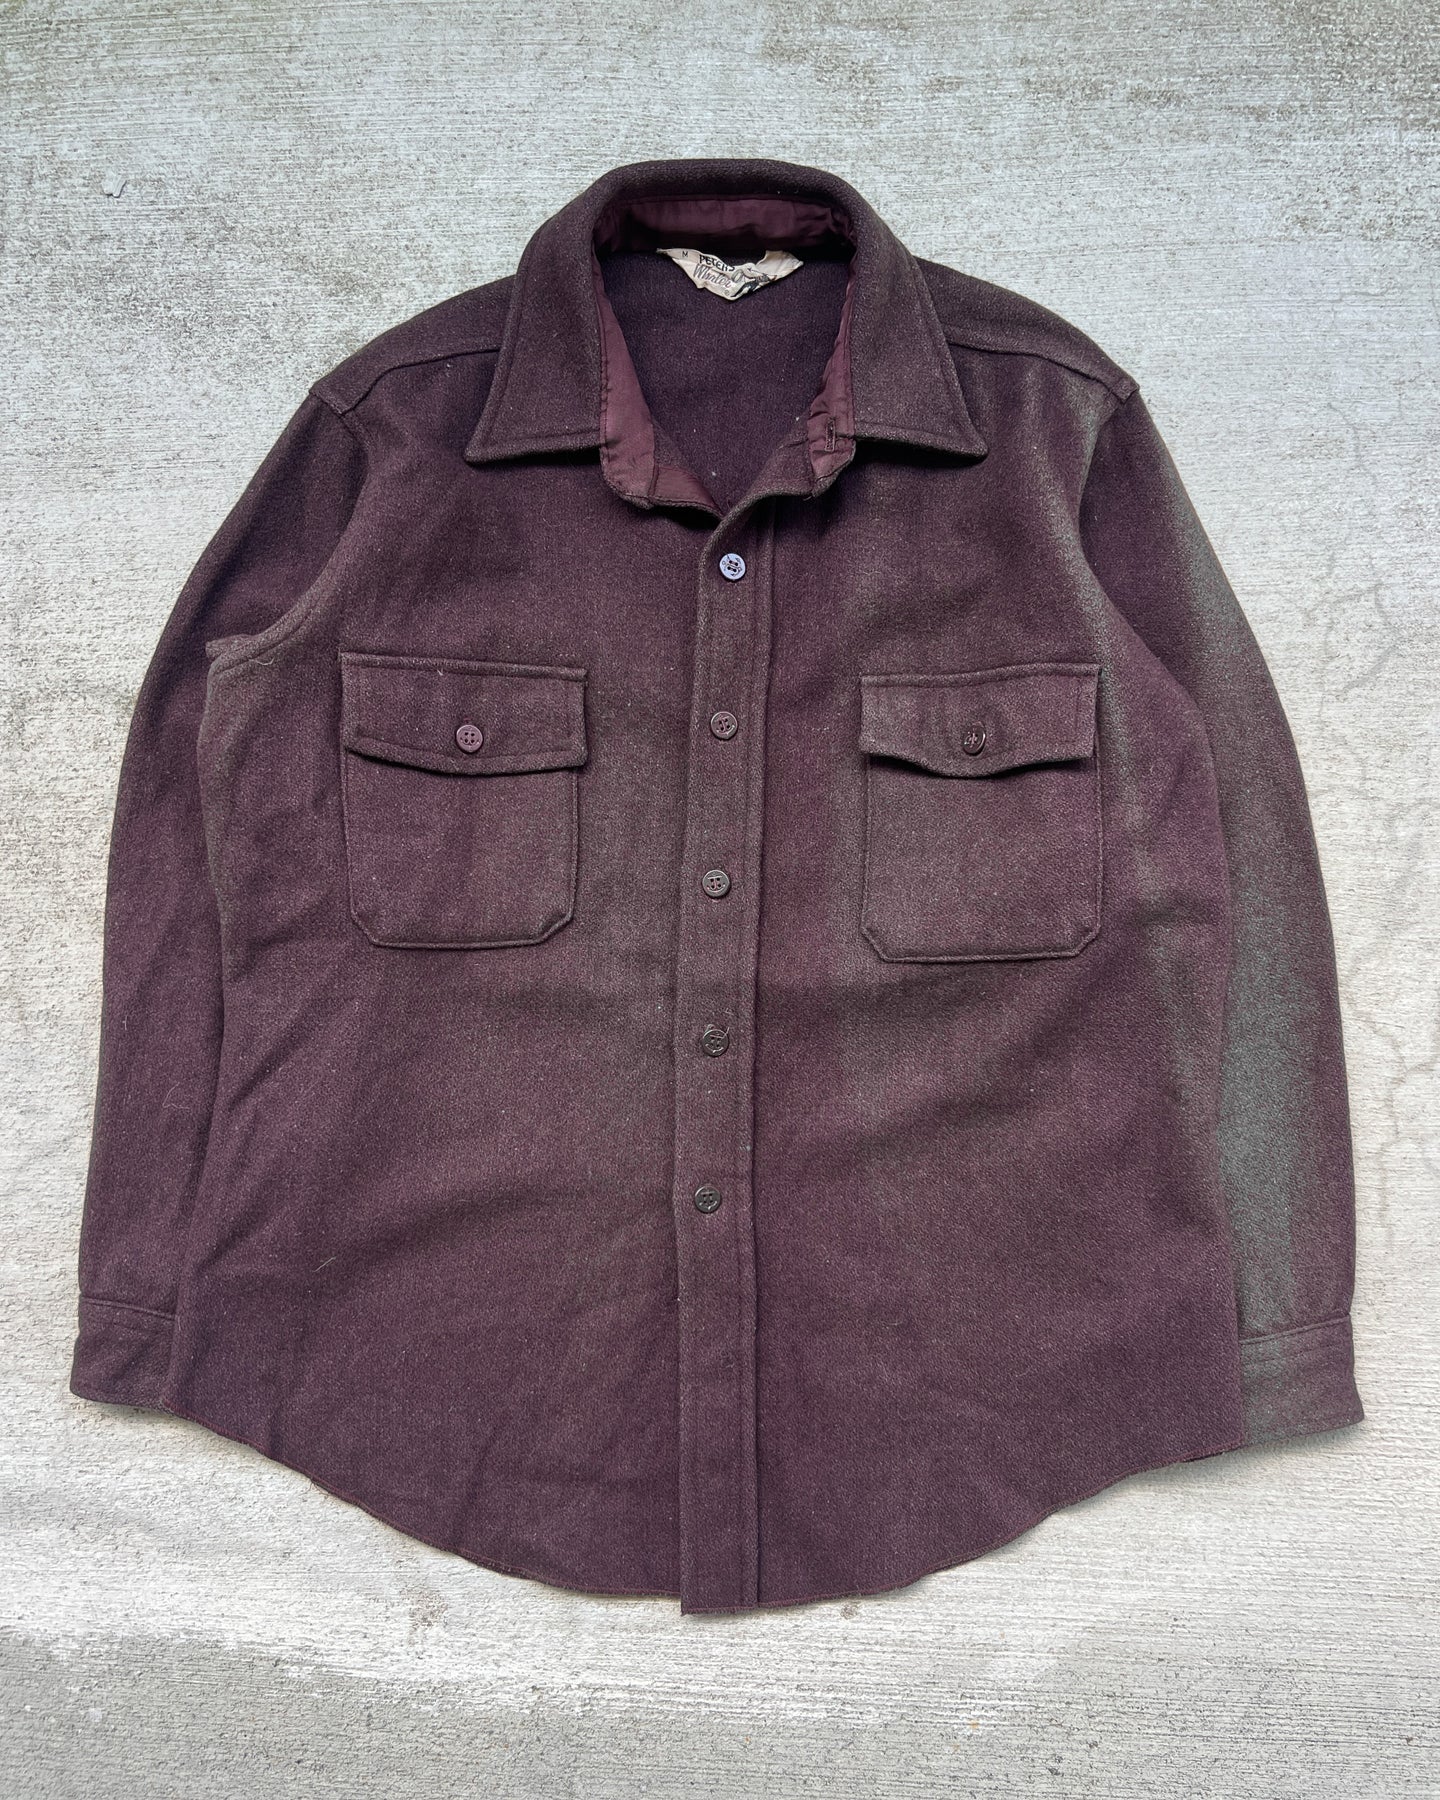 1970s Wool Brown Button Down Shirt - Large